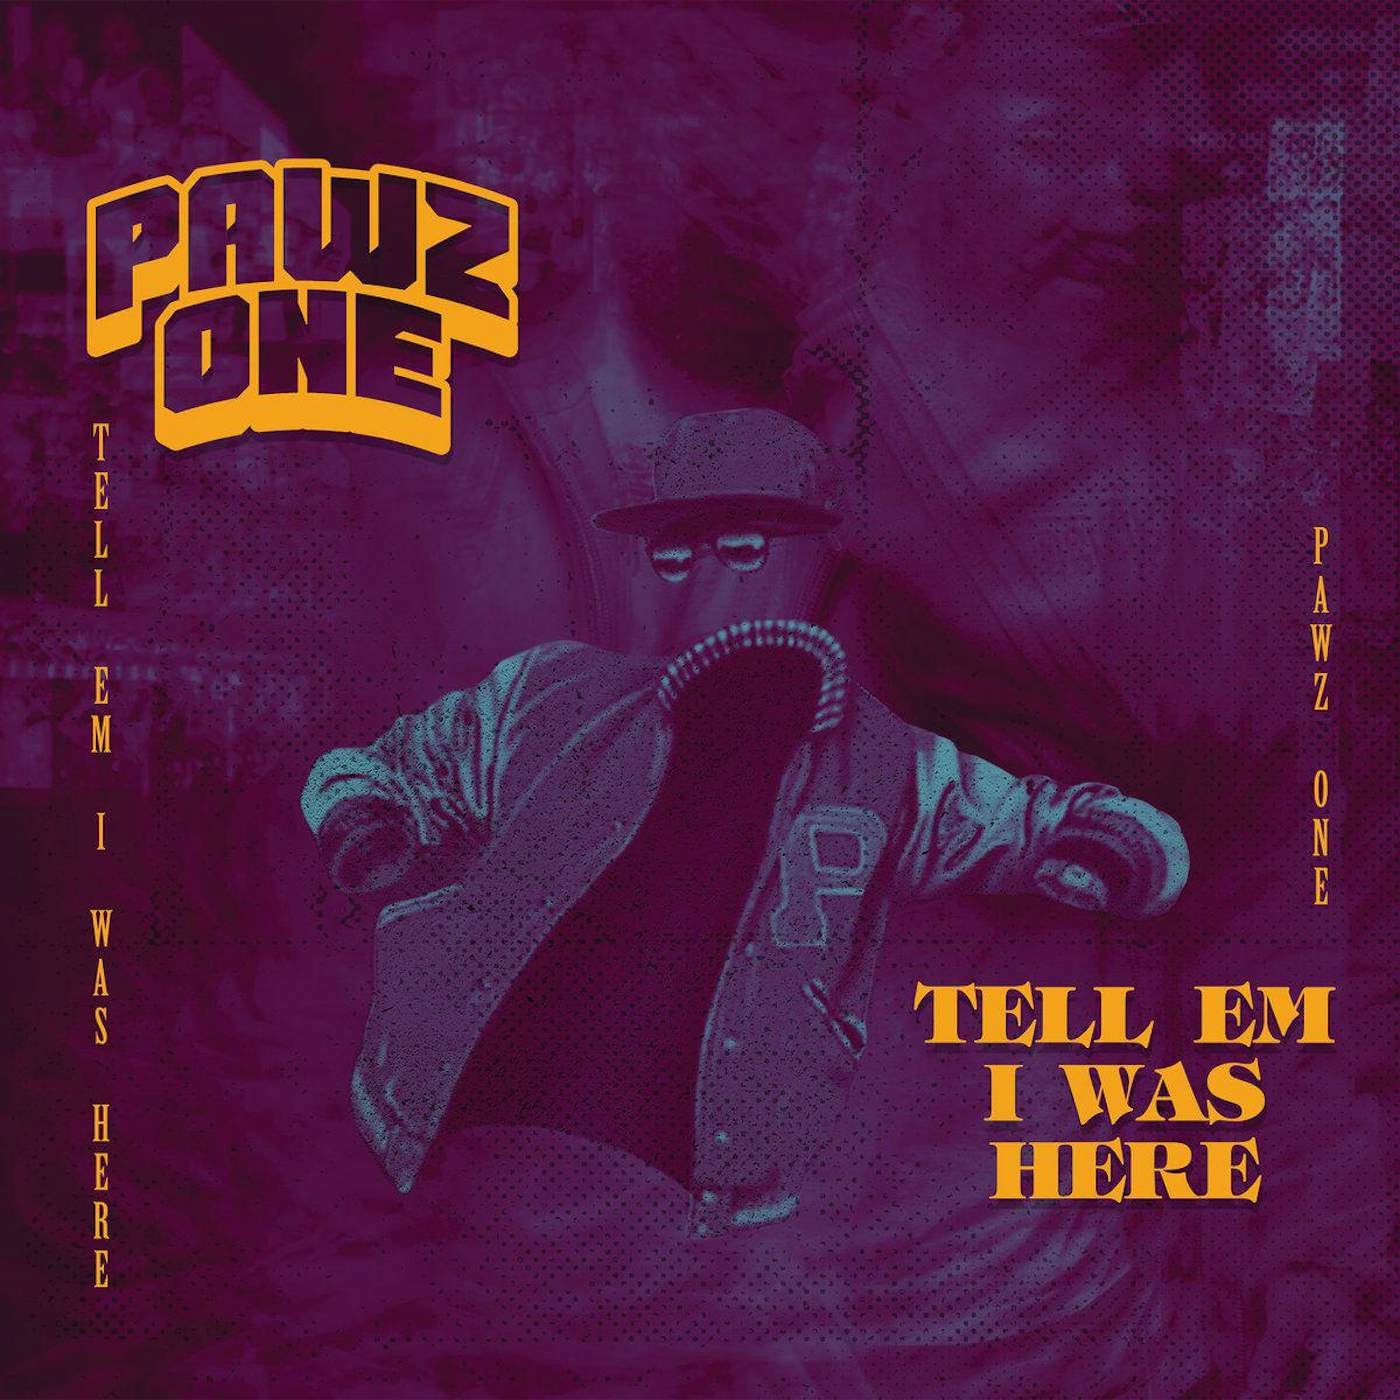 Pawz One TELL EM I WAS HERE Vinyl Record